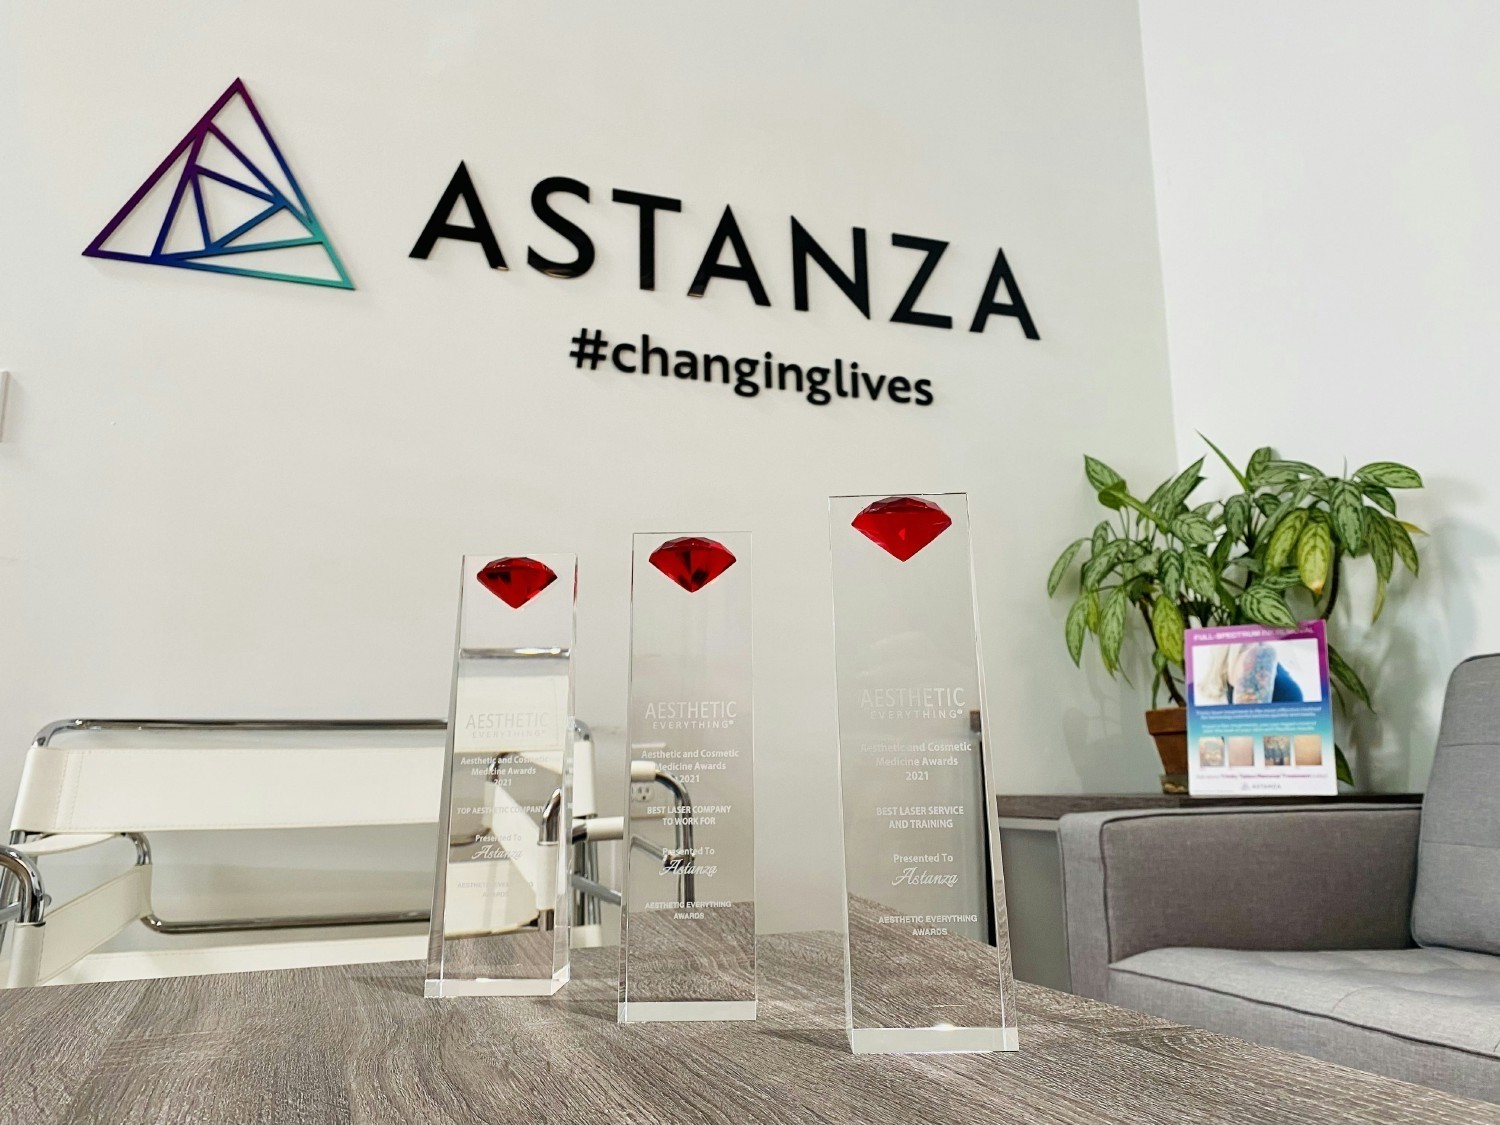 ASTANZA'S RECEPTION AREA FEATURING OUR LOGO, #CHANGINGLIVES MOTTO, AND A FEW AWARDS.